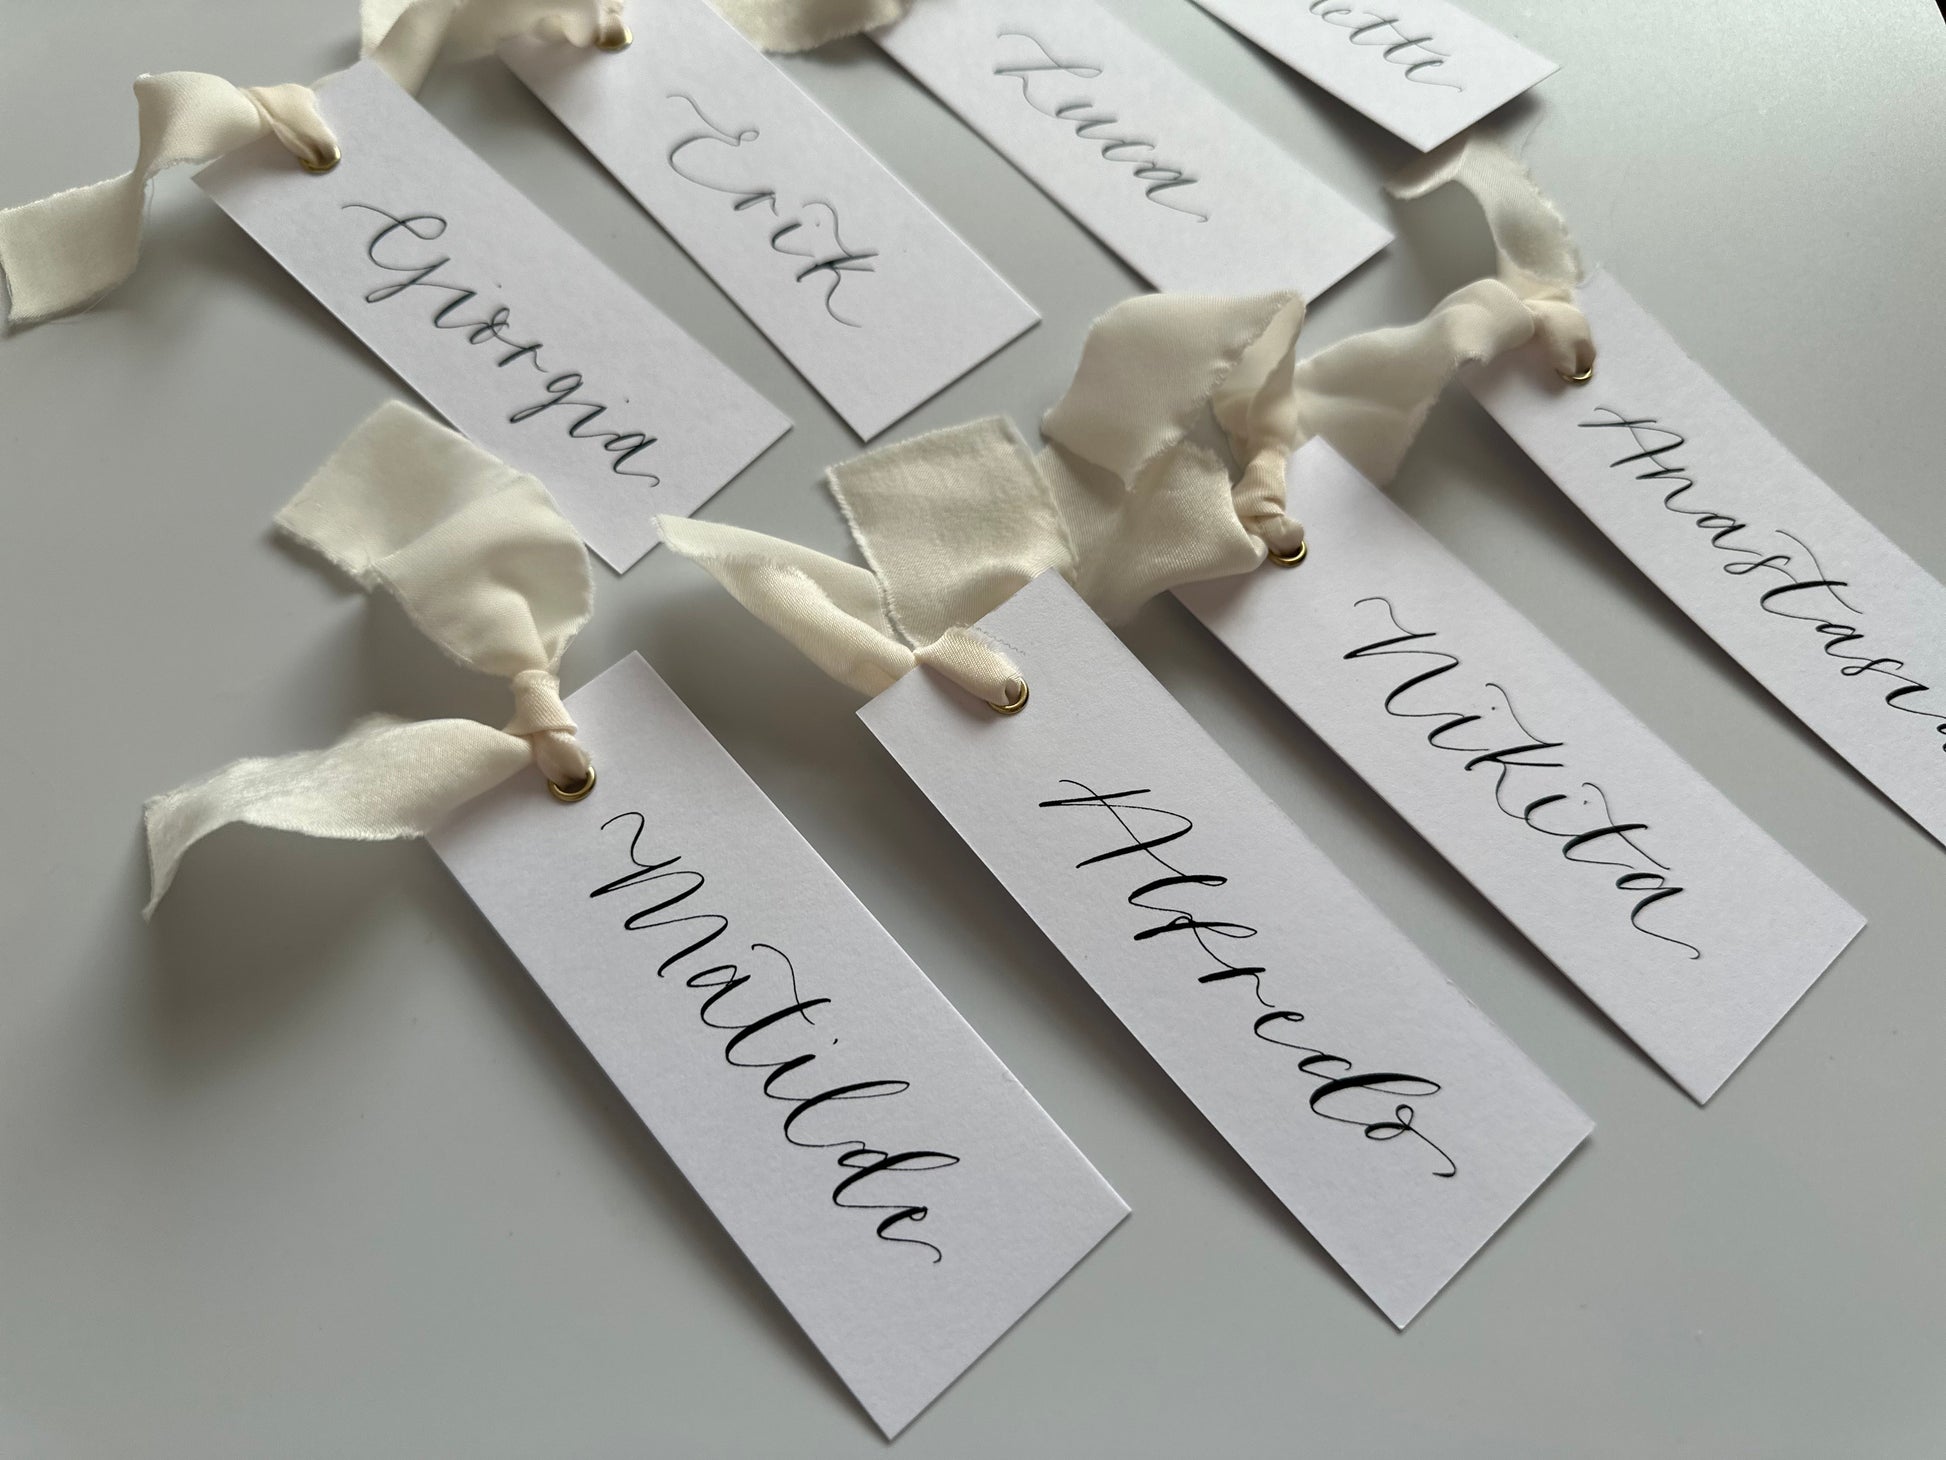 White Place Card, Ivory Place Card, Calligraphy Place Card, Wedding Place Card, Wedding Place nameWhite Place Card, Ivory Place Card, Calligraphy Place Card, Wedding Place Card, Wedding Place name